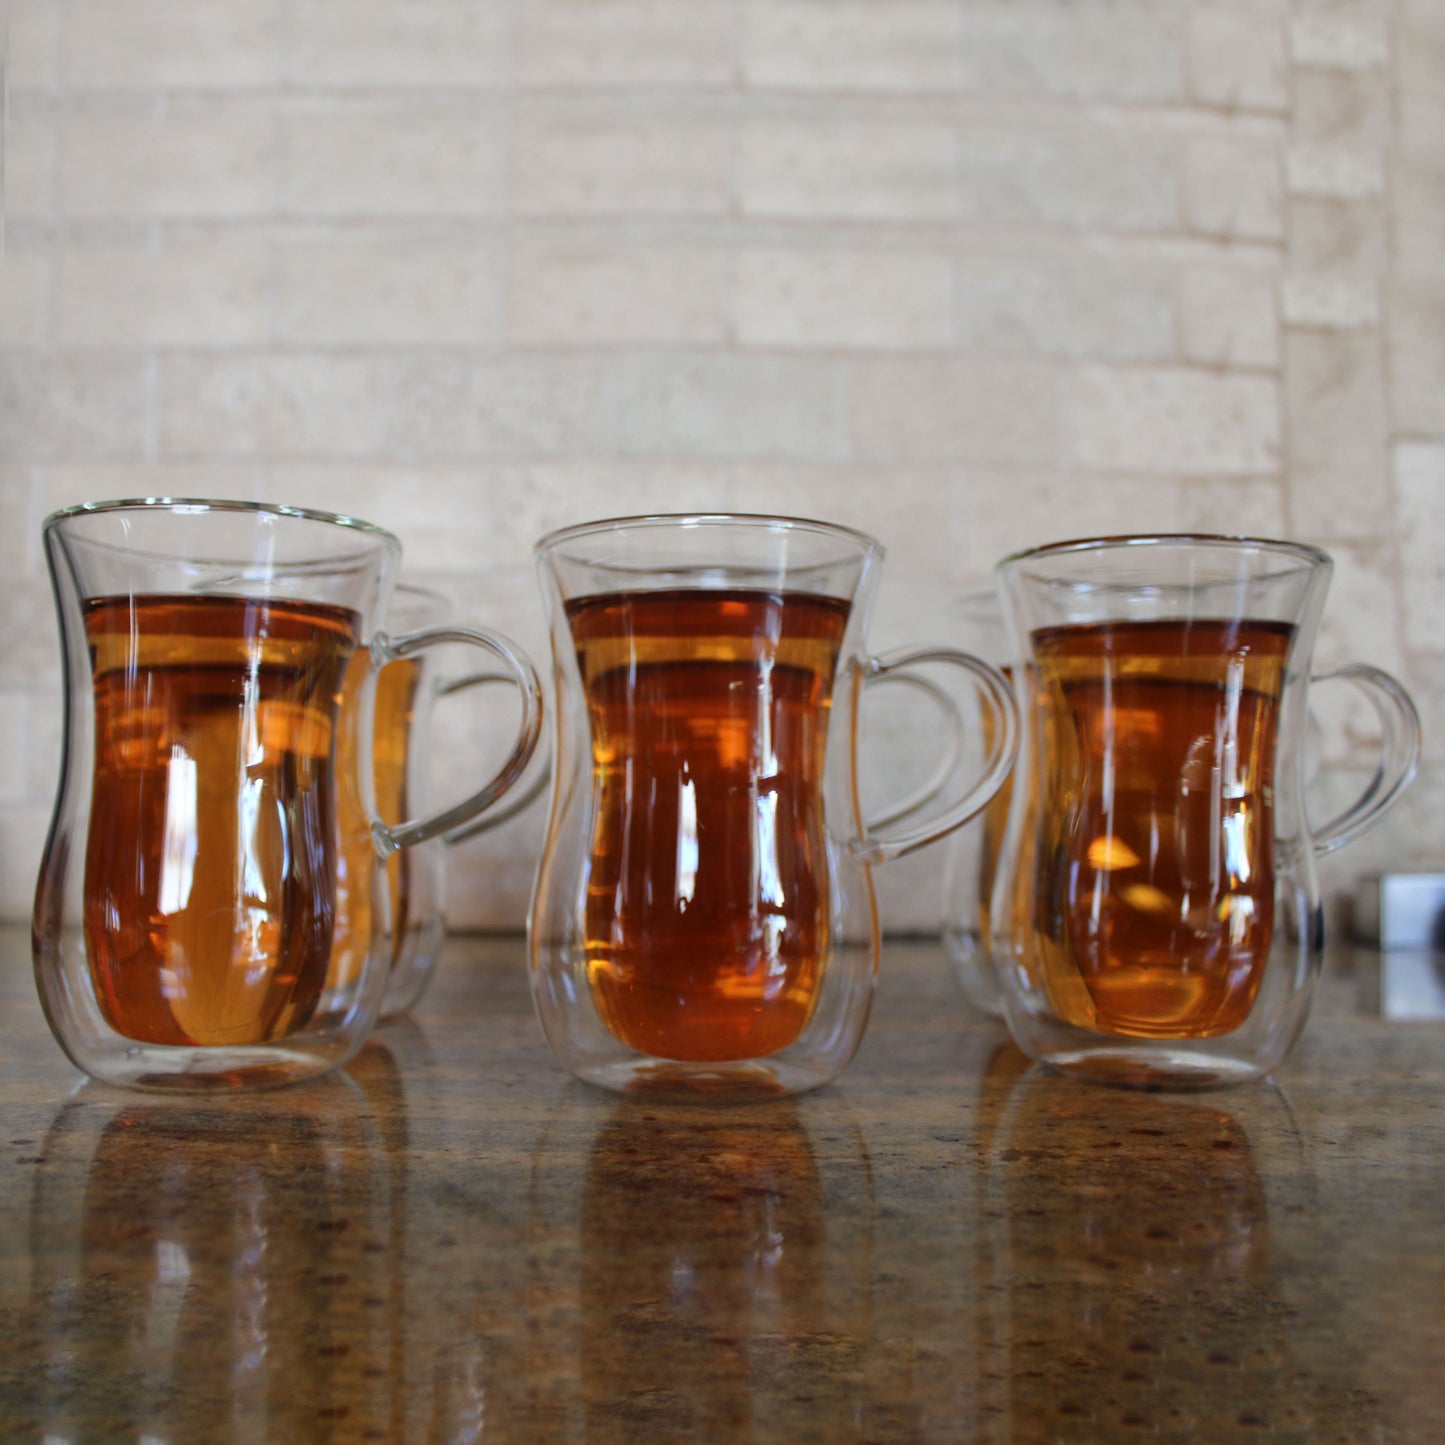 6 Oz Double Wall Tea Cup with Handle – Set of 6